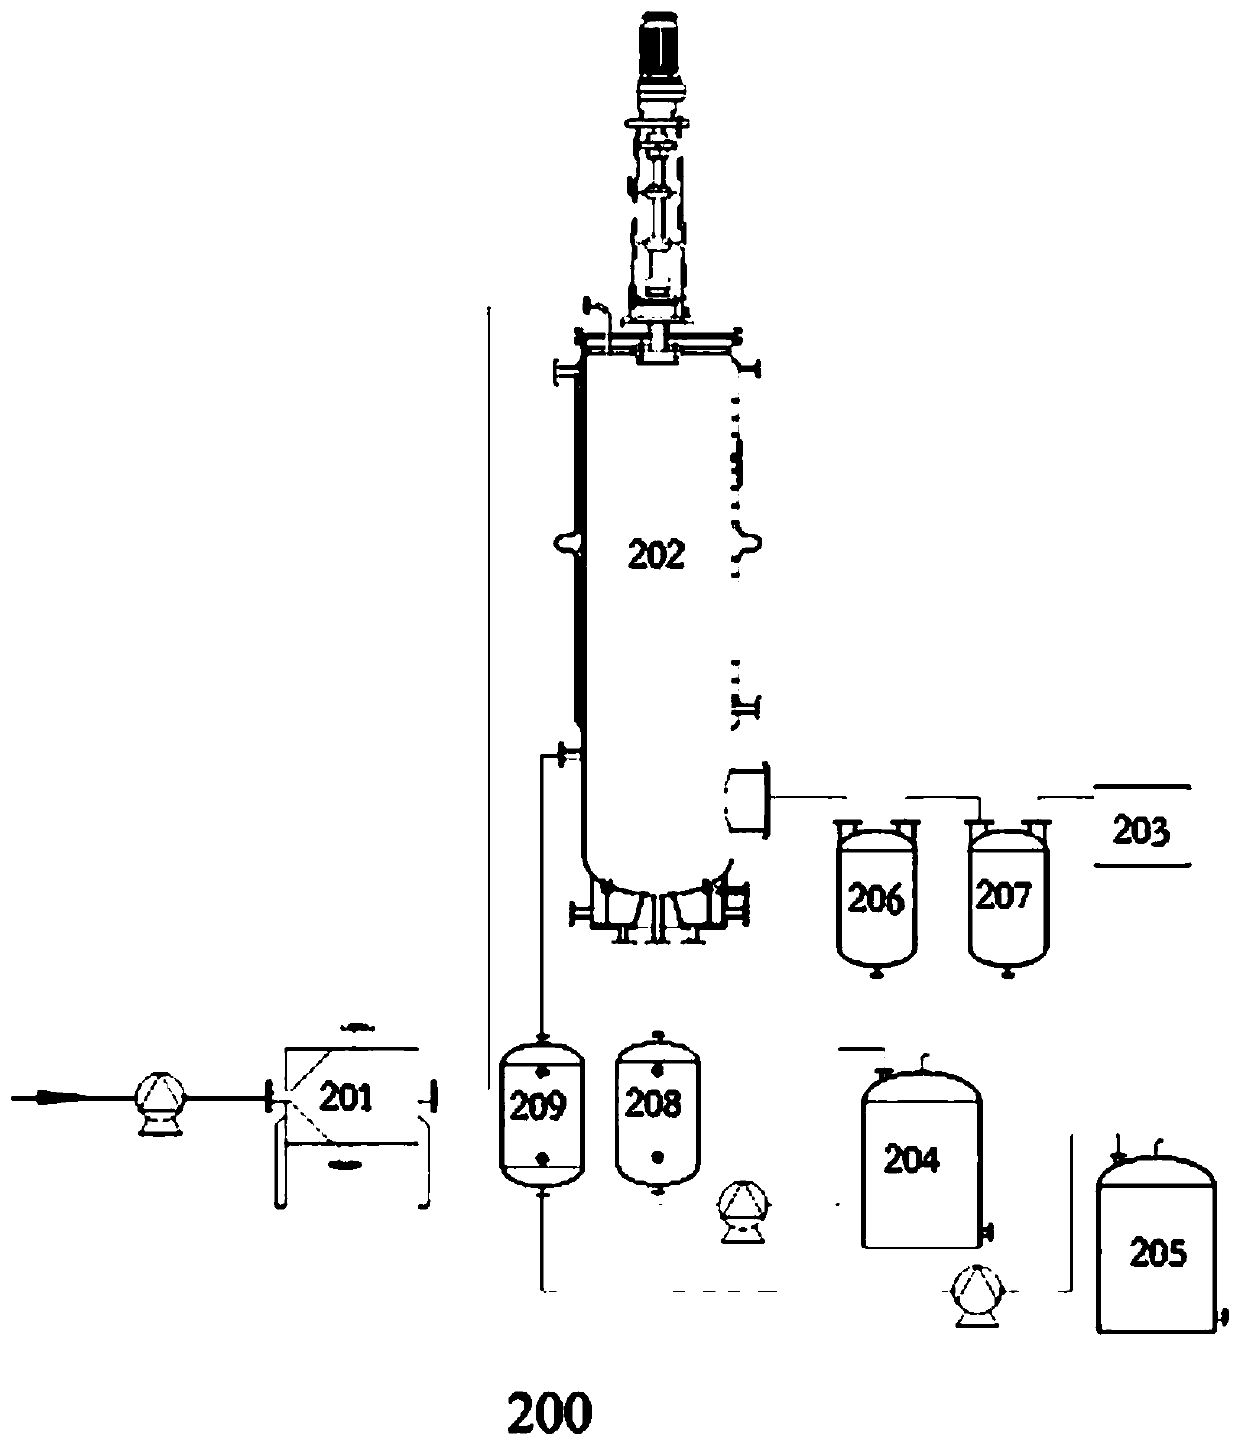 A biodiesel production system